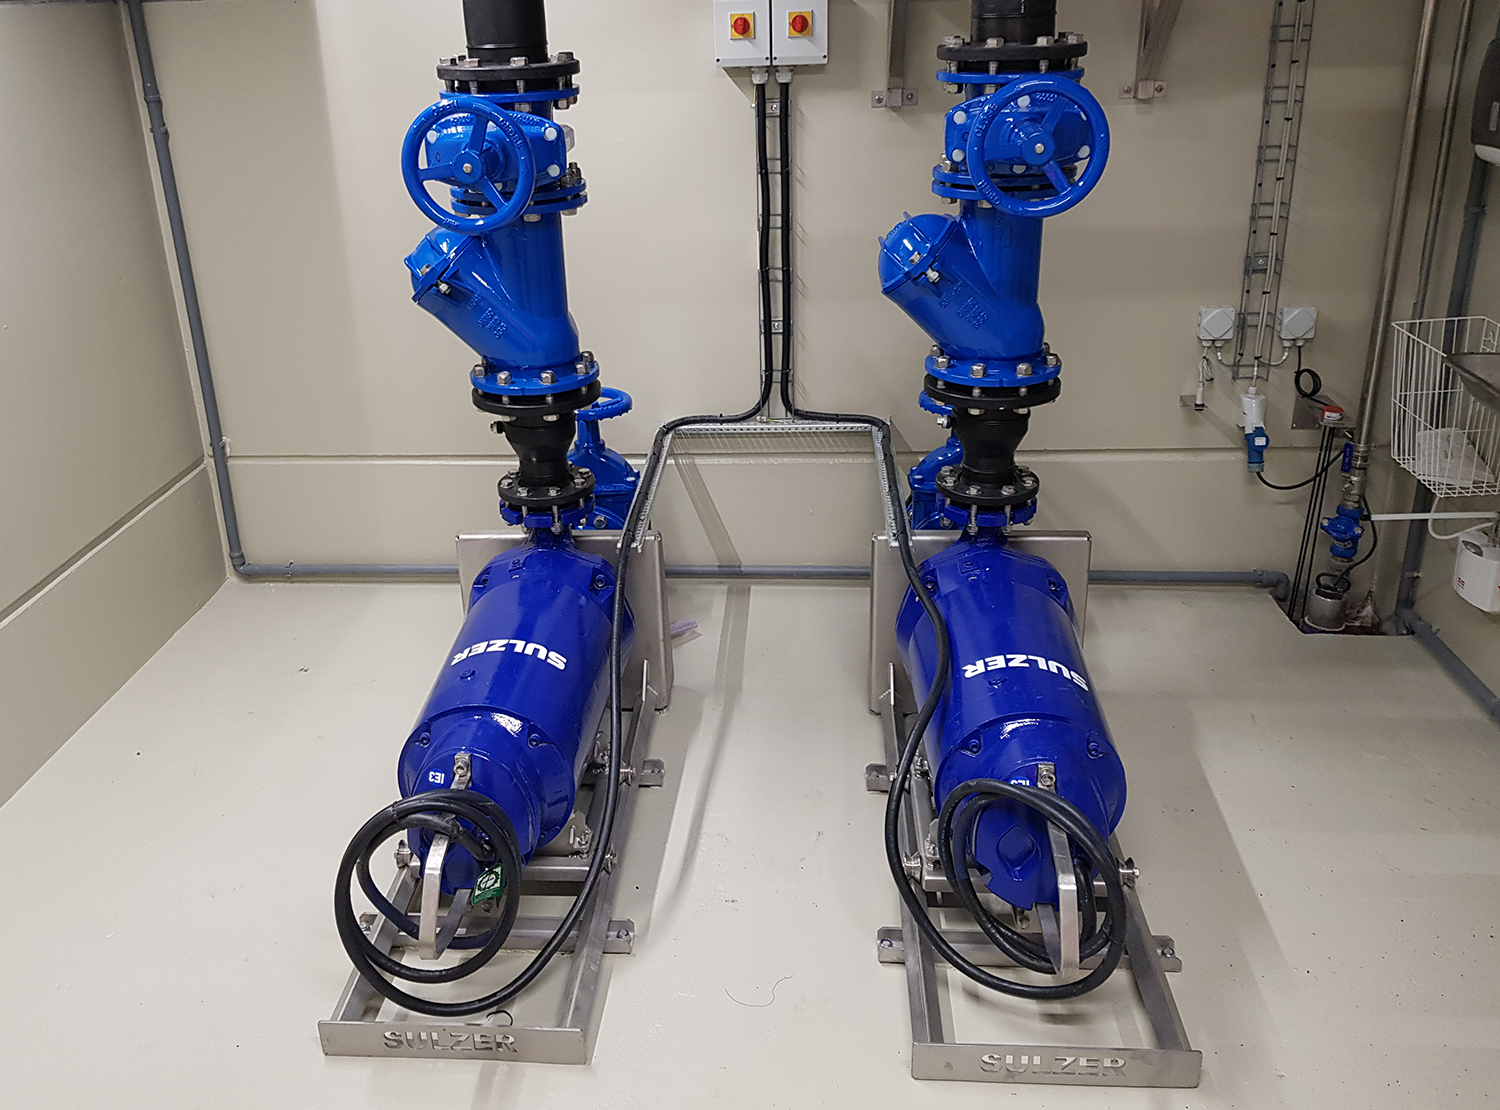 The XFP pumps working in a duty/standby arrangement, give the station a capacity of 25 liters per second.